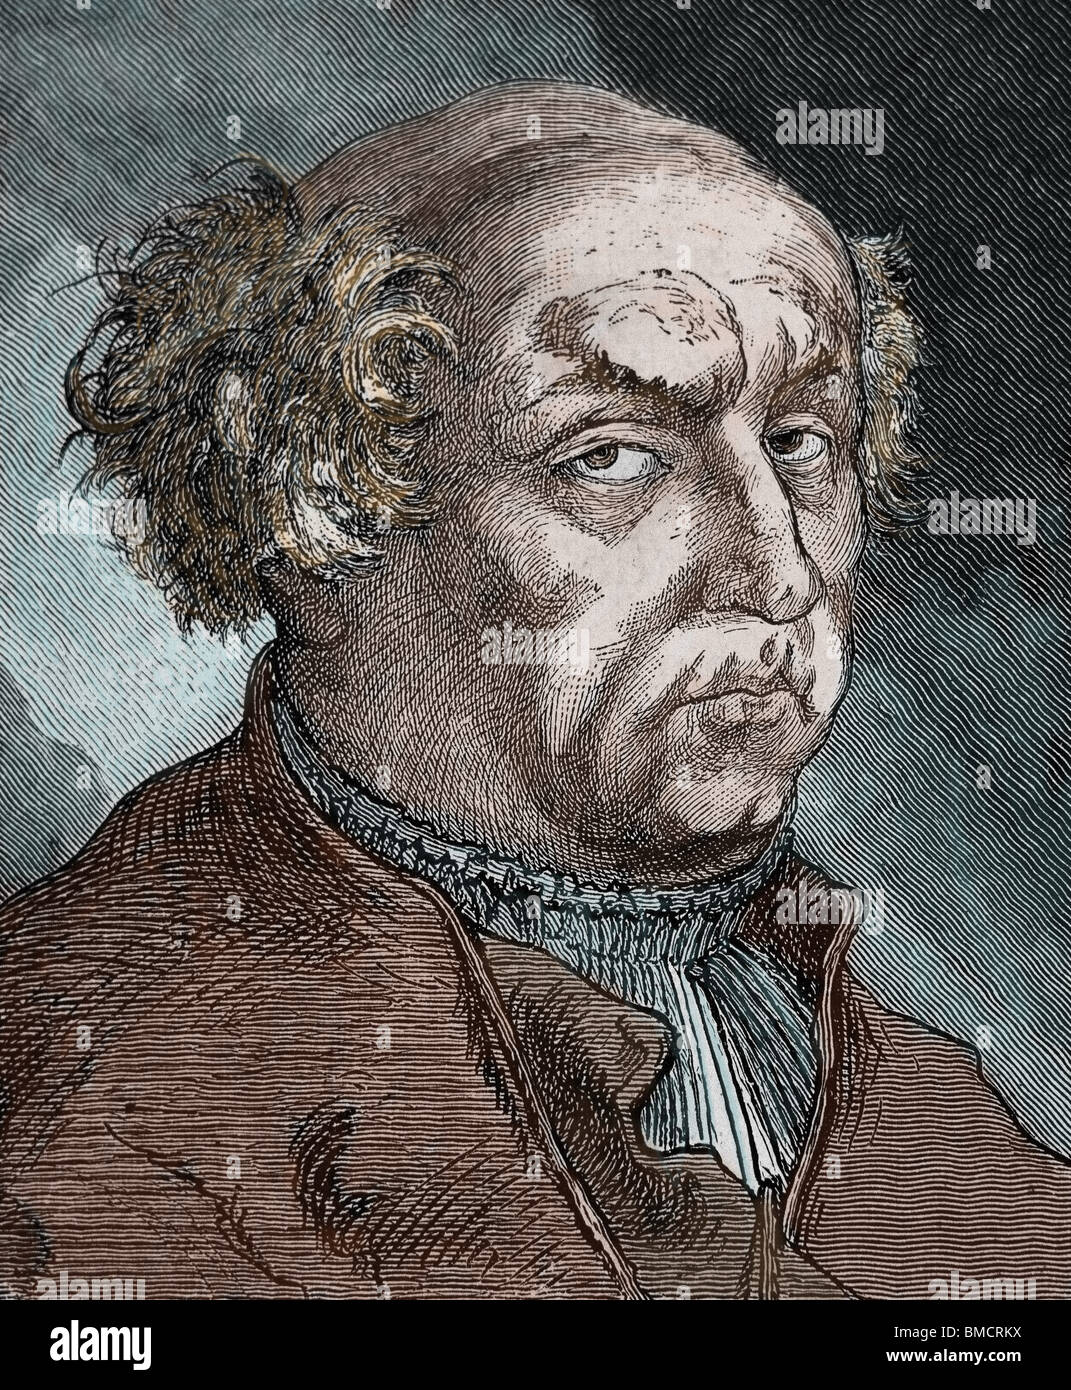 Paracelsus (1493-1541). Swiss physician, botanist, alchemist, astrologer, and general occultist. Stock Photo